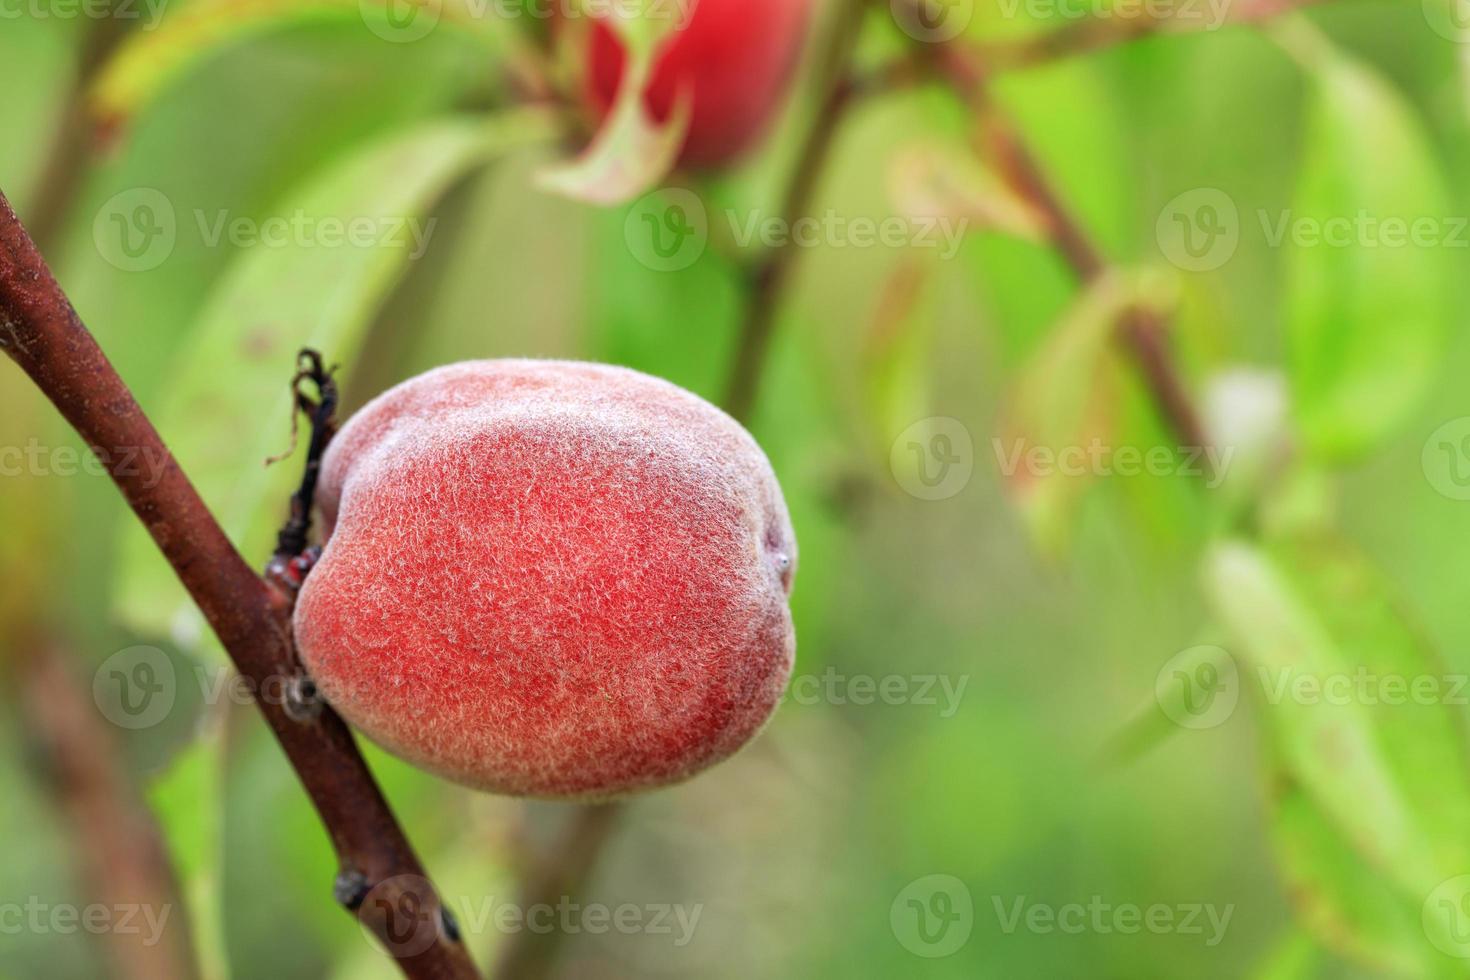 Ripe sweet peach growing on a tree branch close-up photo